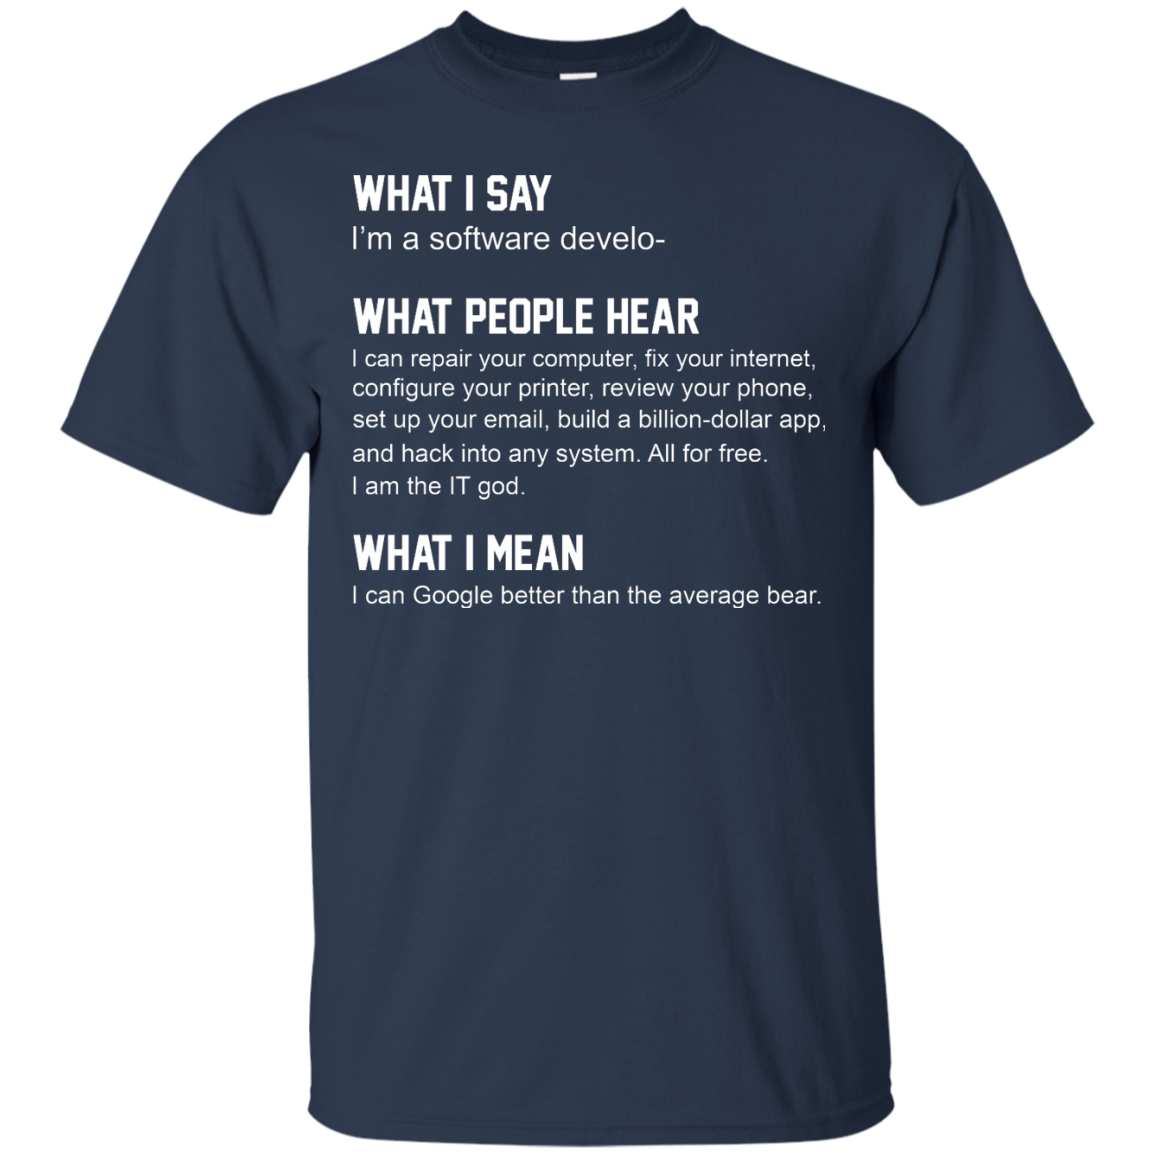 Developer Funny shirts - what people hear when i say i'm a software de...